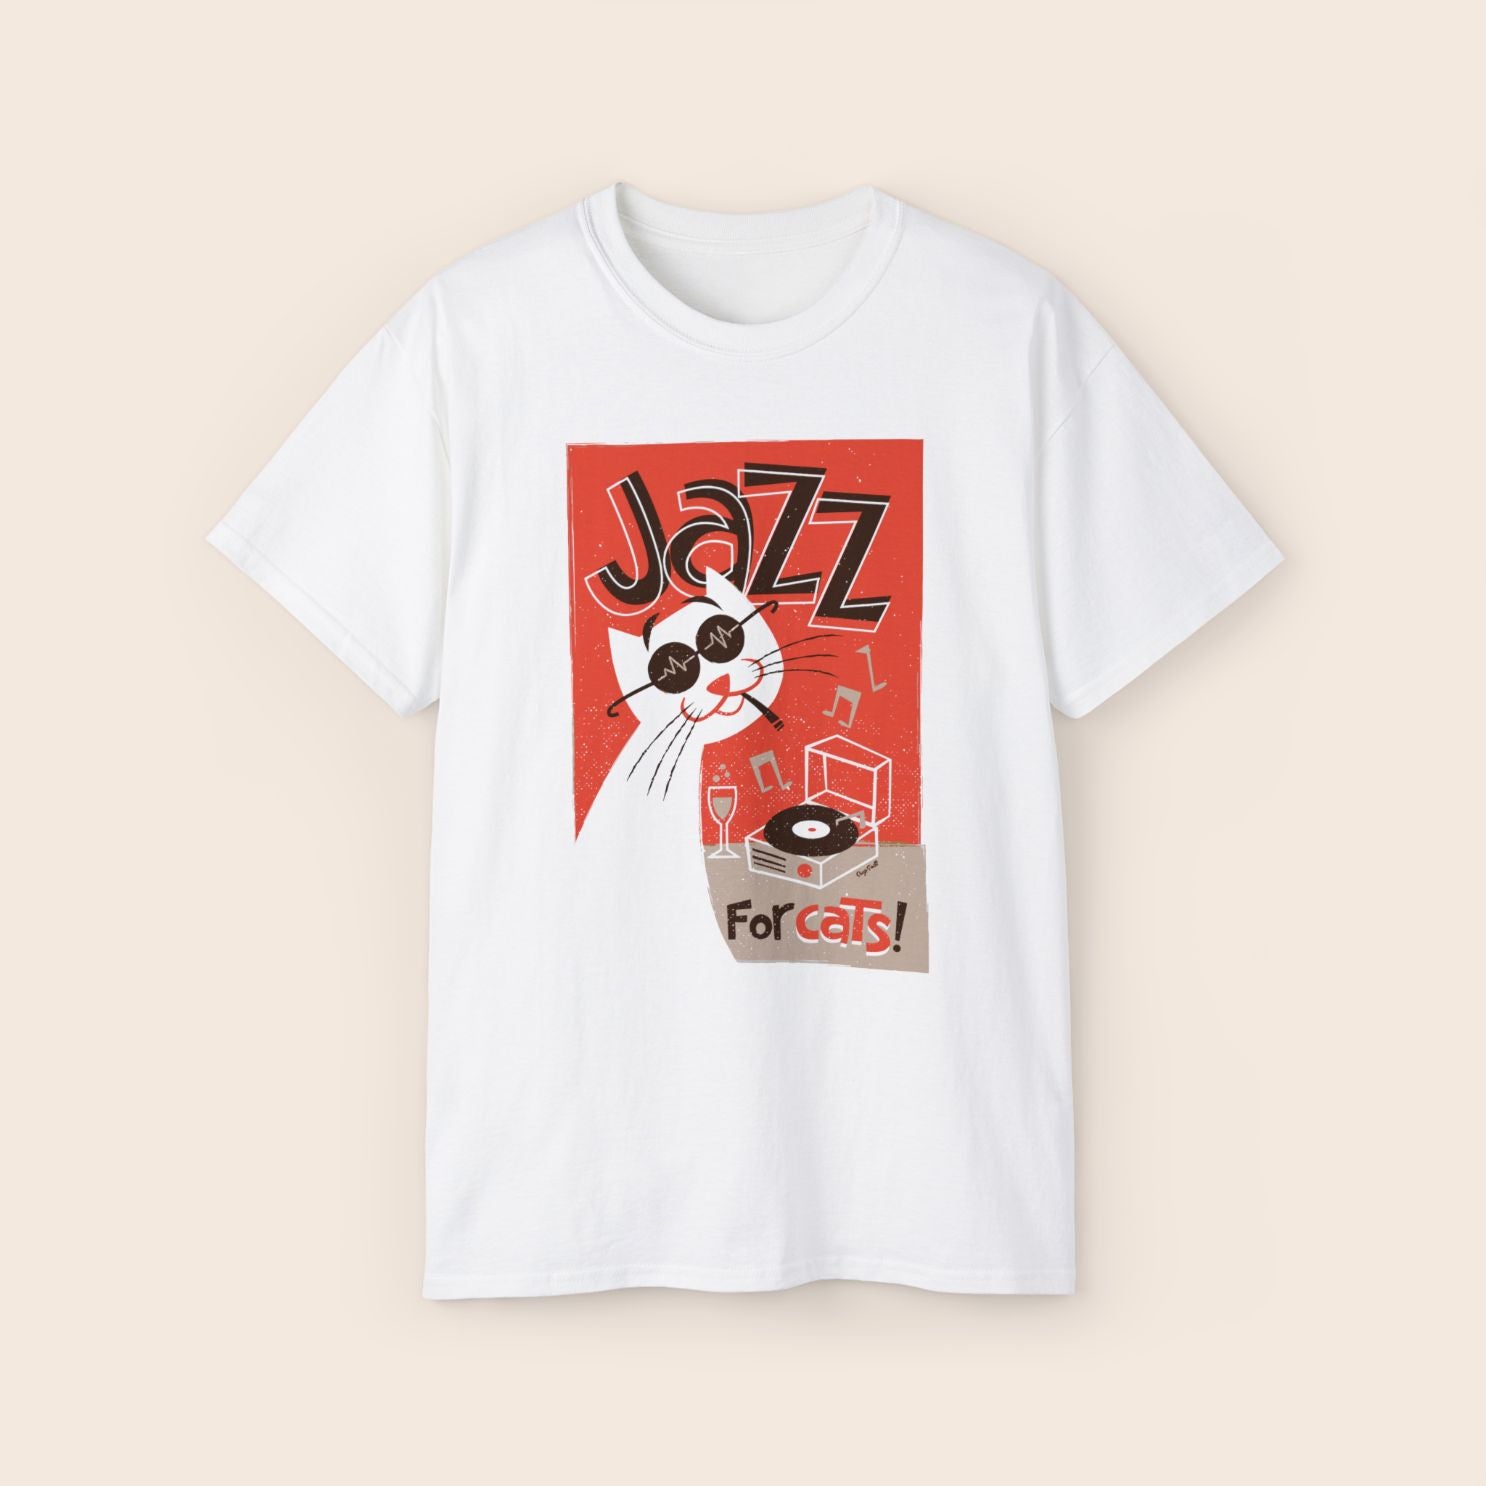 Jazz for Cats